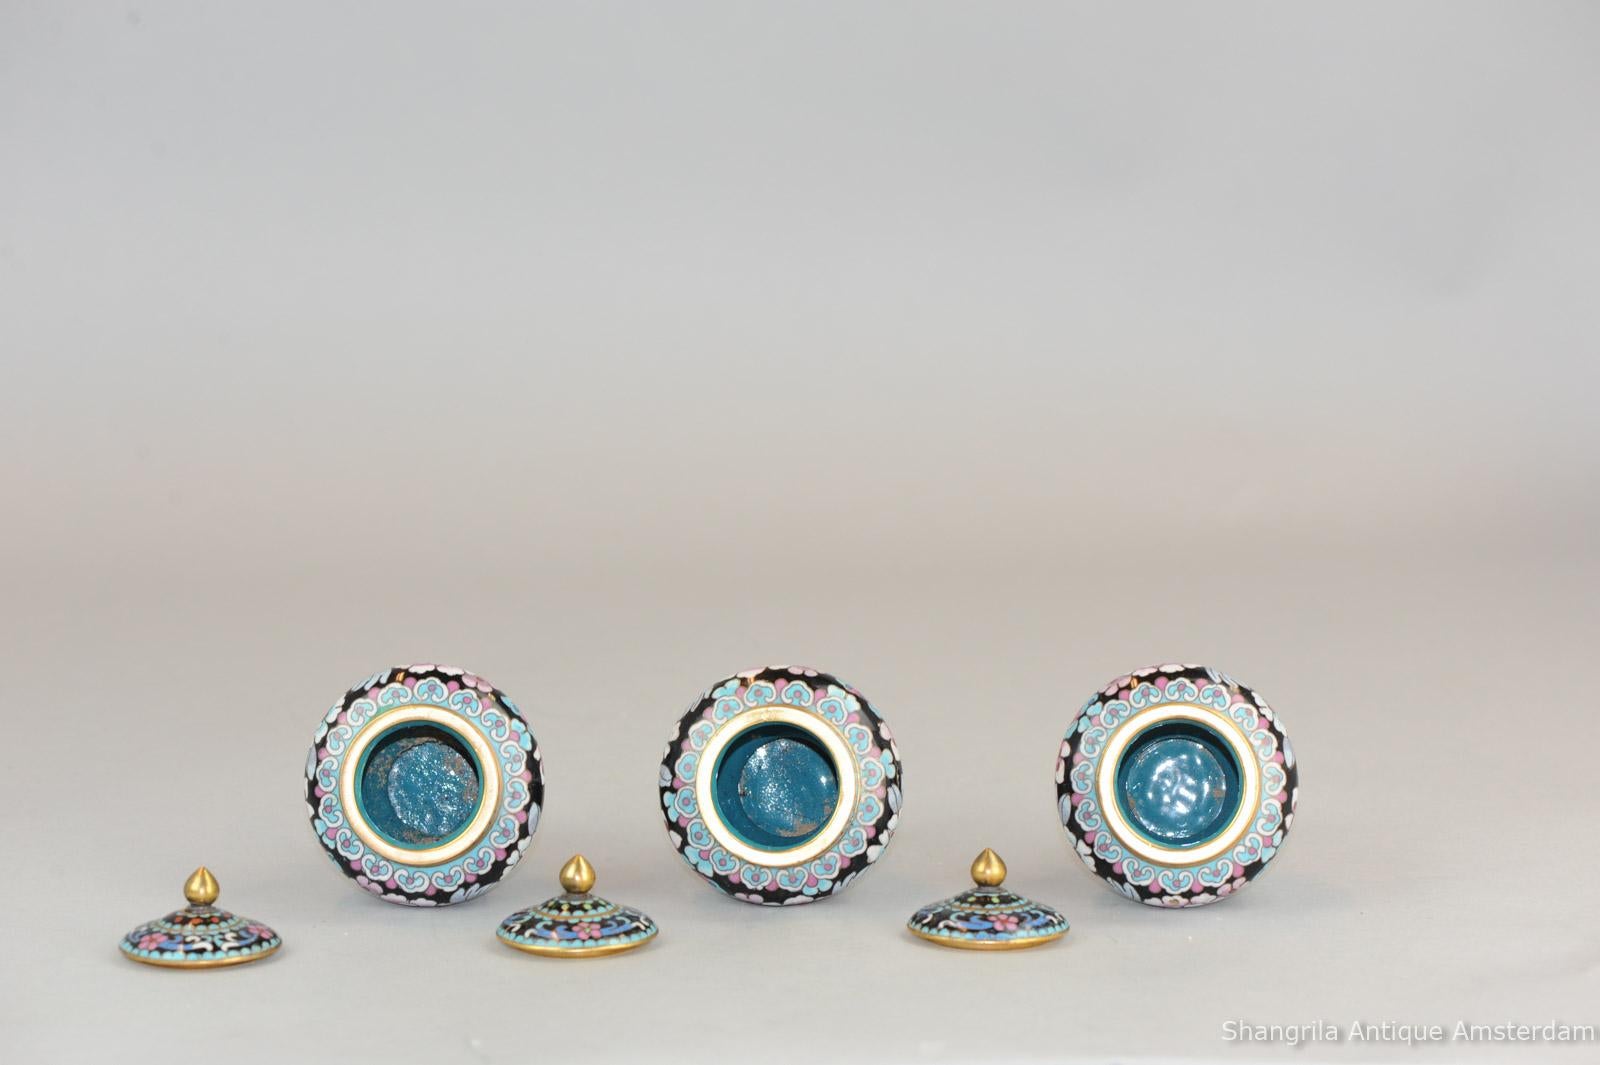 Set of 3 Antique/Vintage Chinese Cloissonne Enamel Vases Republic, 20th Century In Good Condition For Sale In Amsterdam, Noord Holland